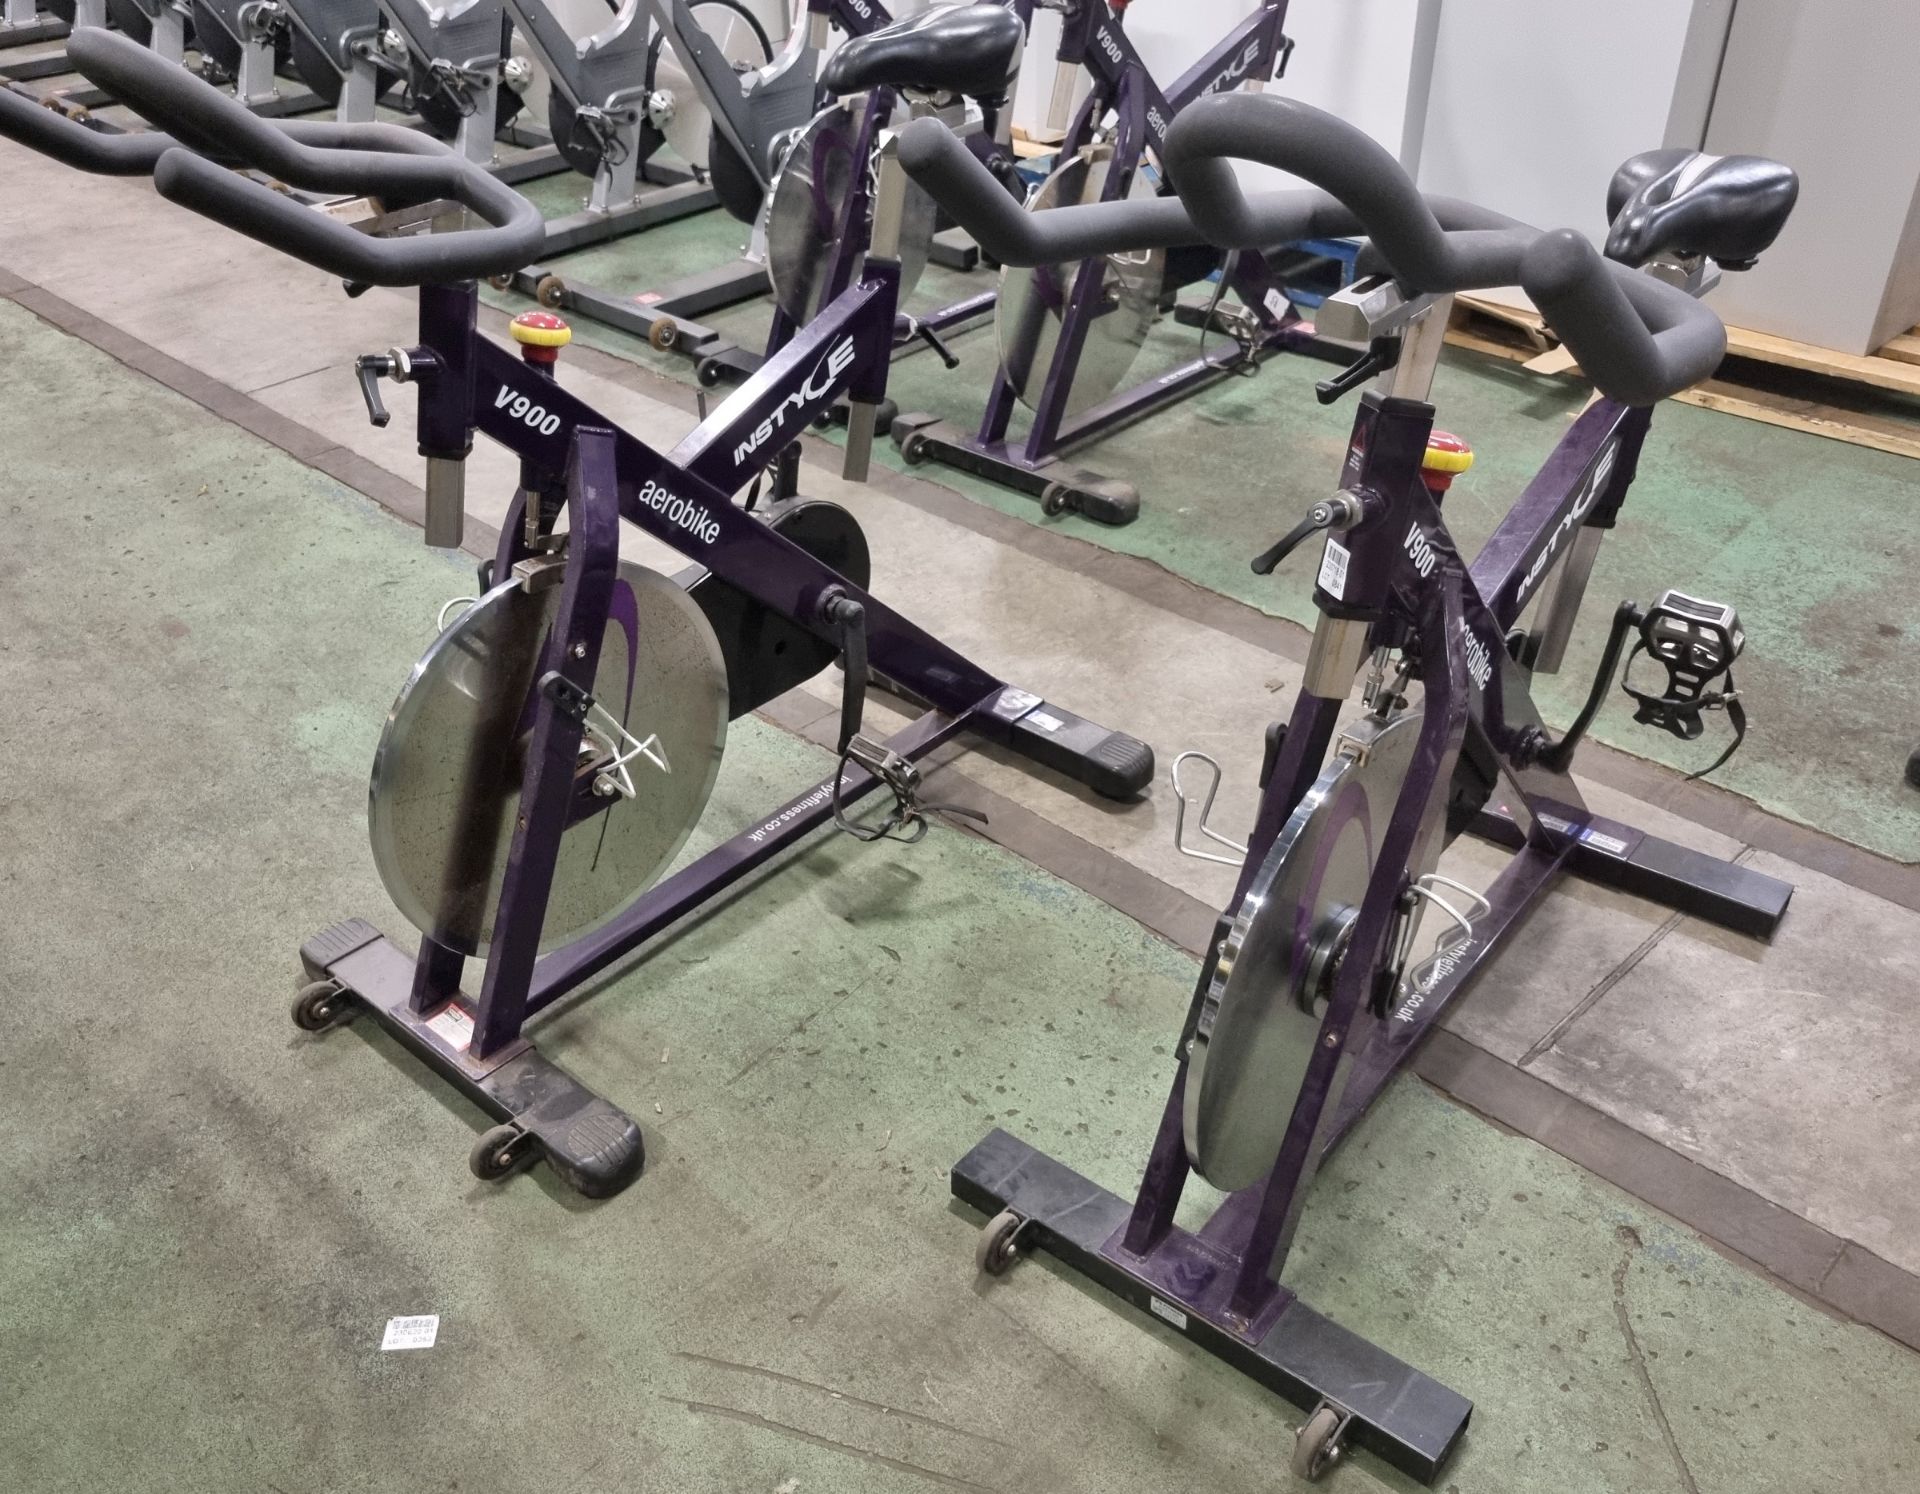 2x InStyle V900 Aerobike spin bikes - Image 2 of 3